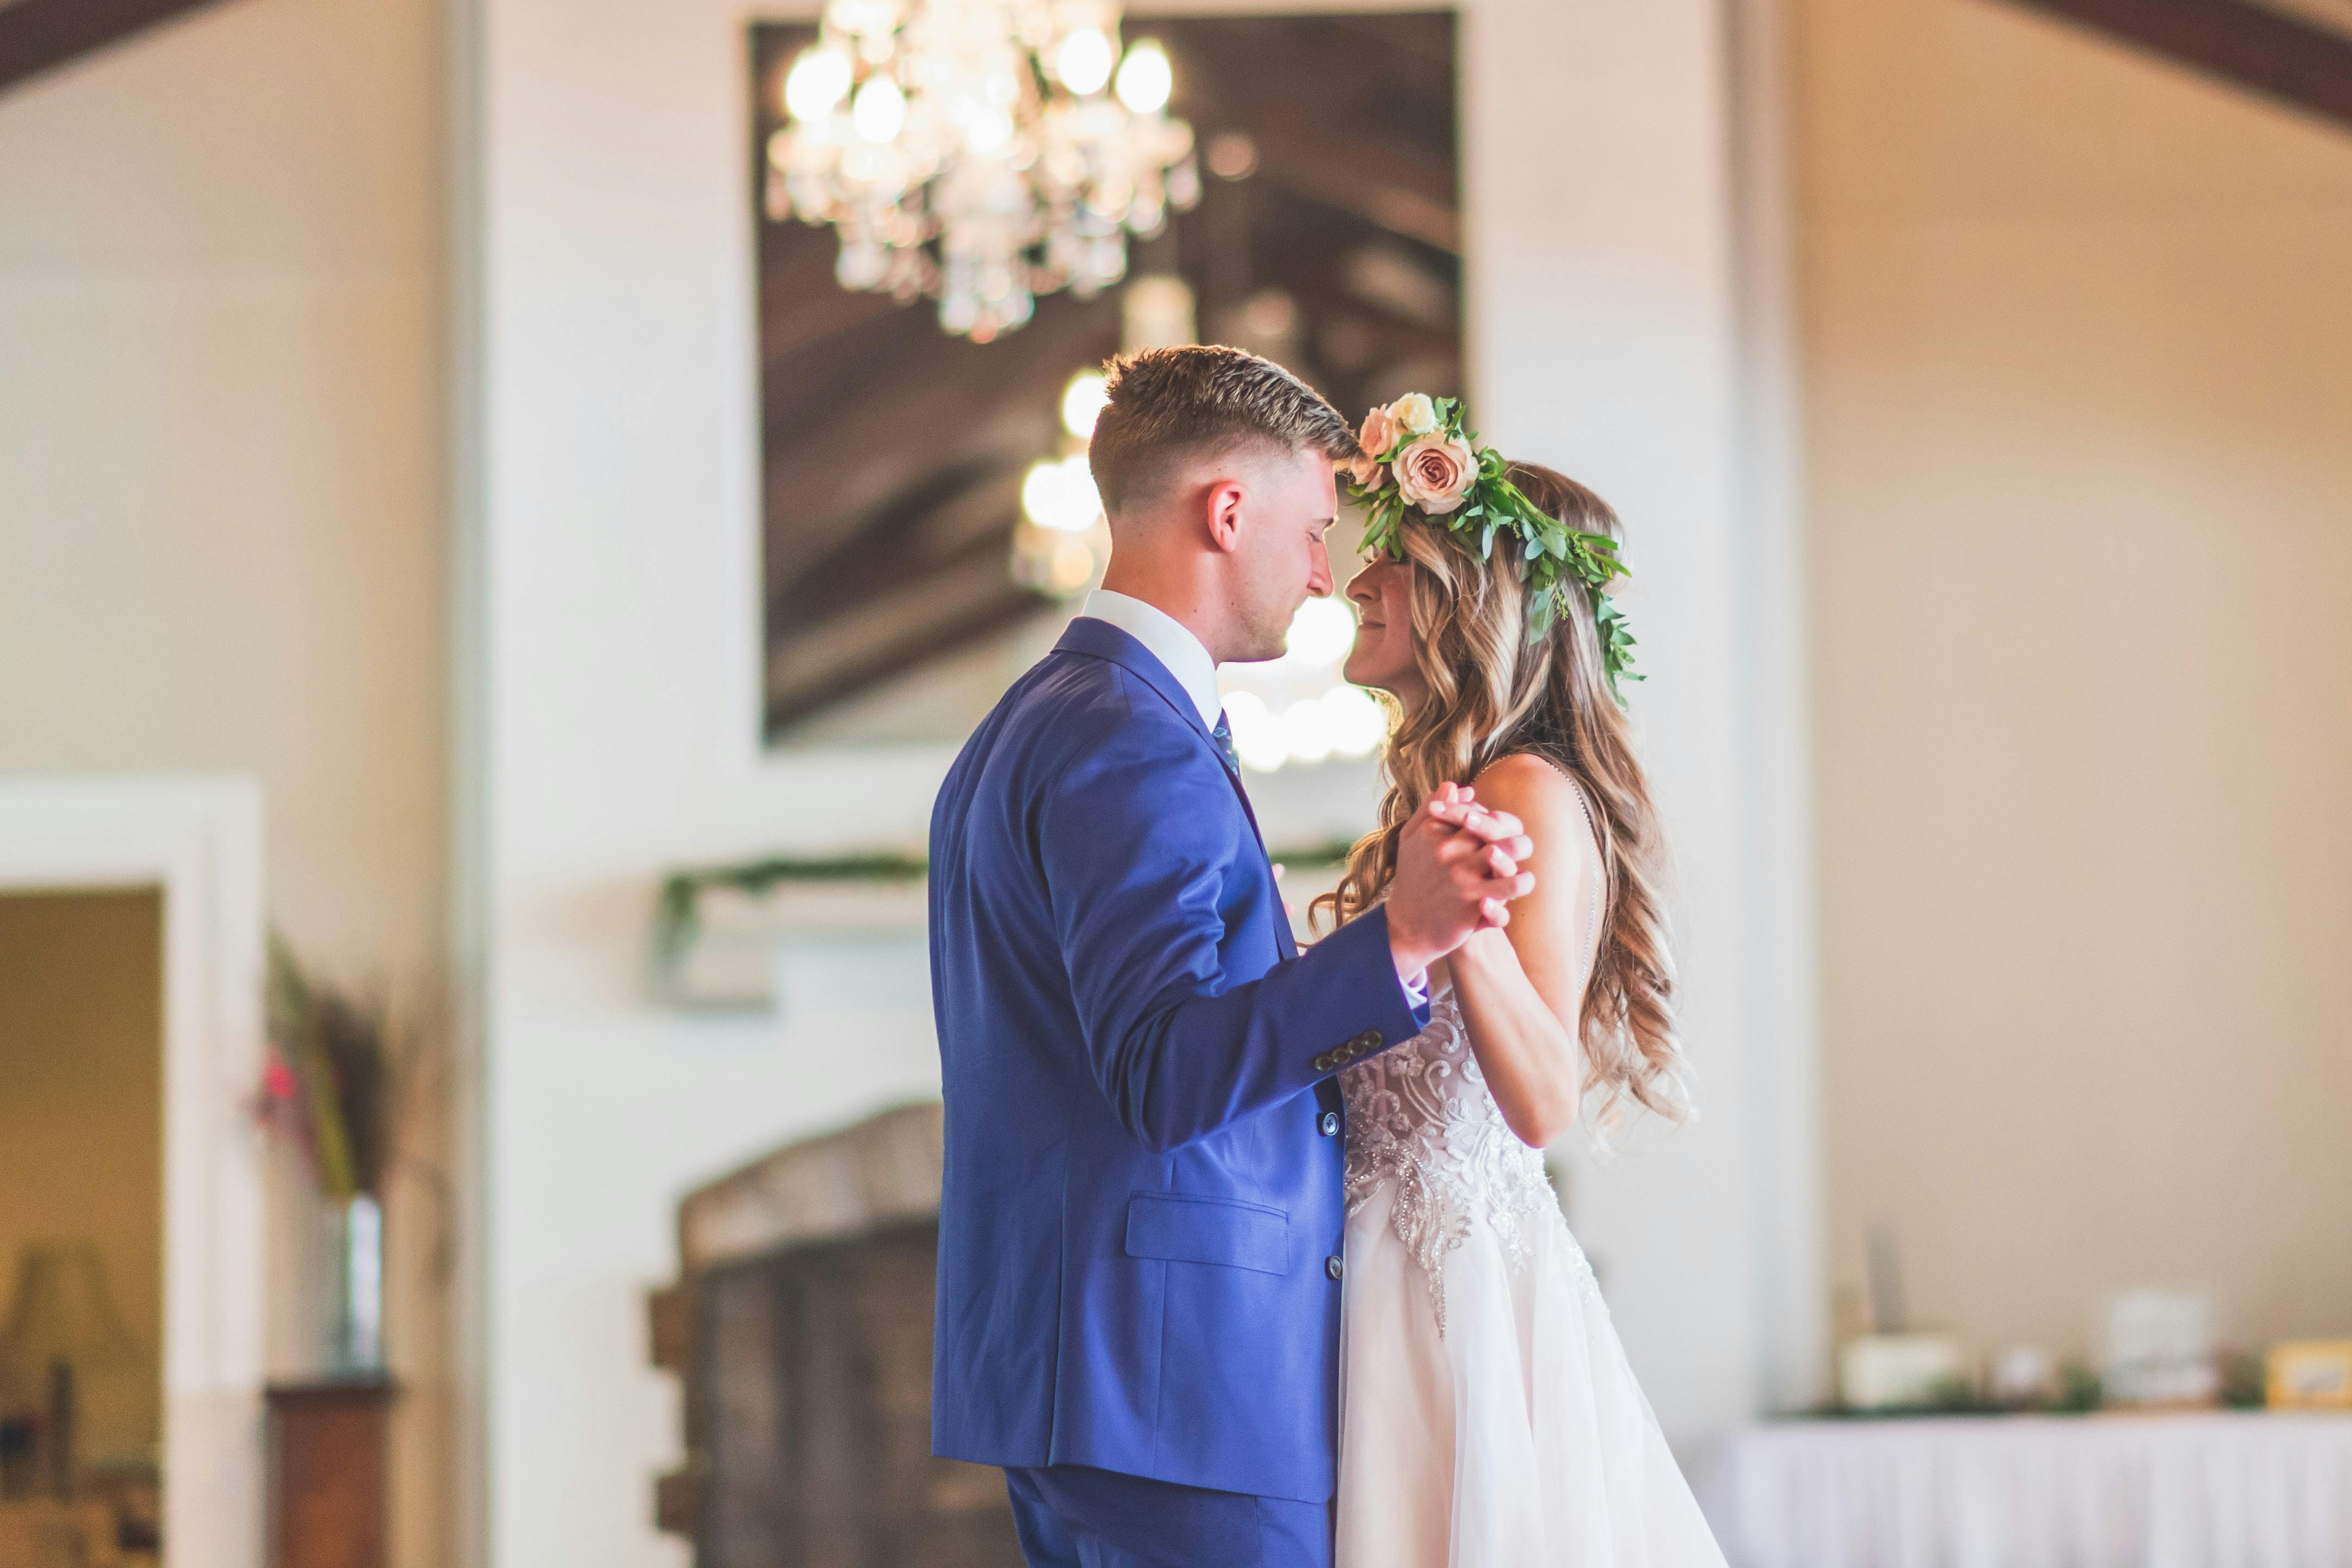 A couple dancing on their wedding day | Source: Pexels